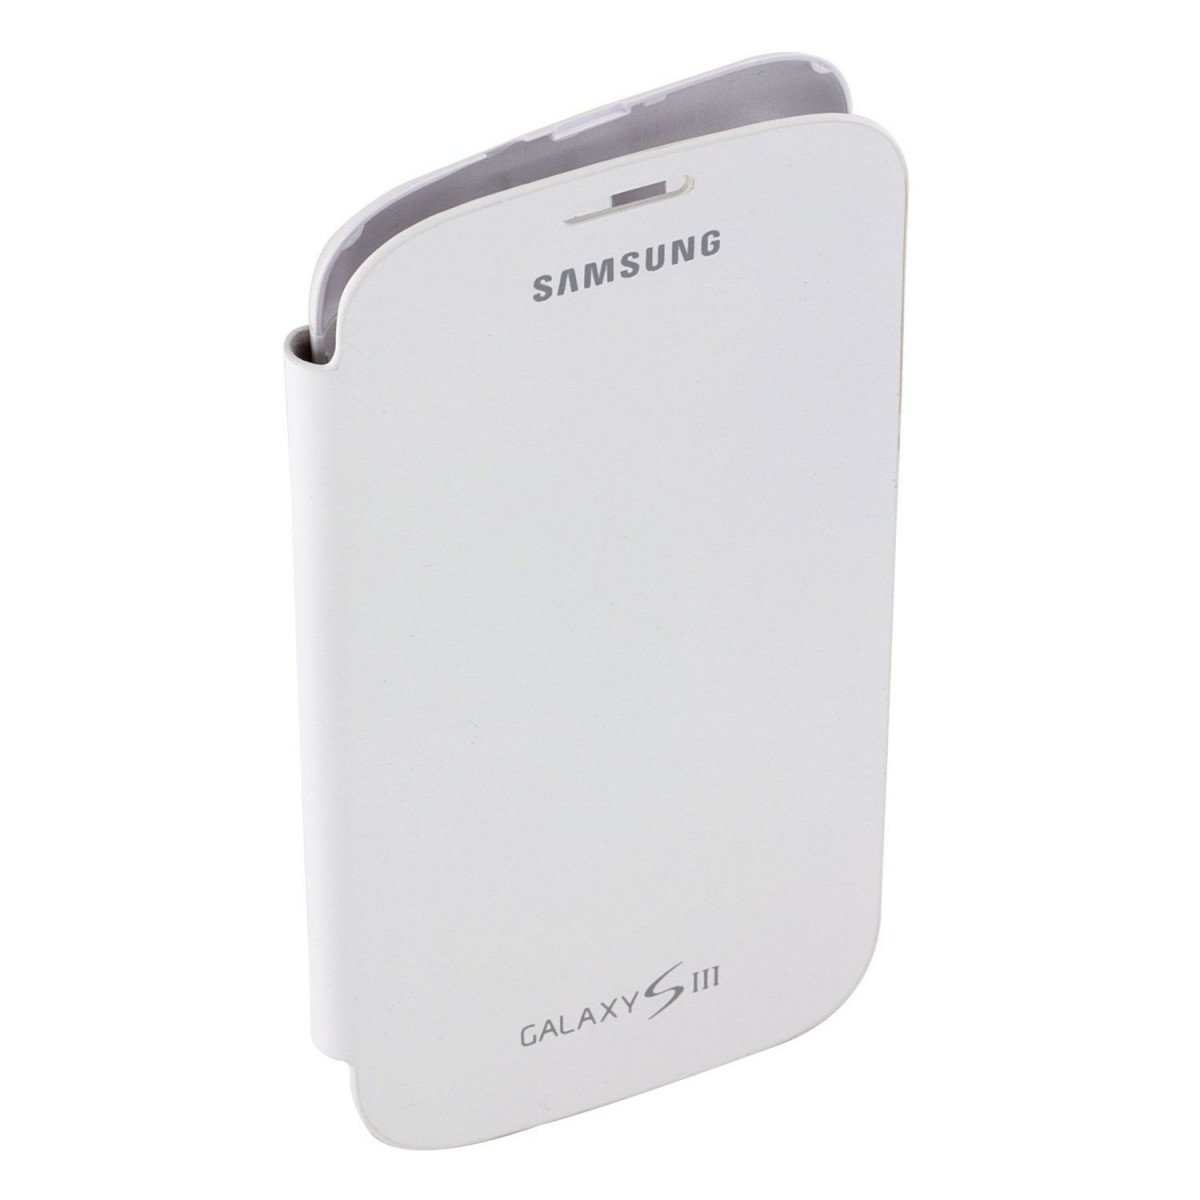 Samsung Galaxy SIII Flip Cover – Marble White